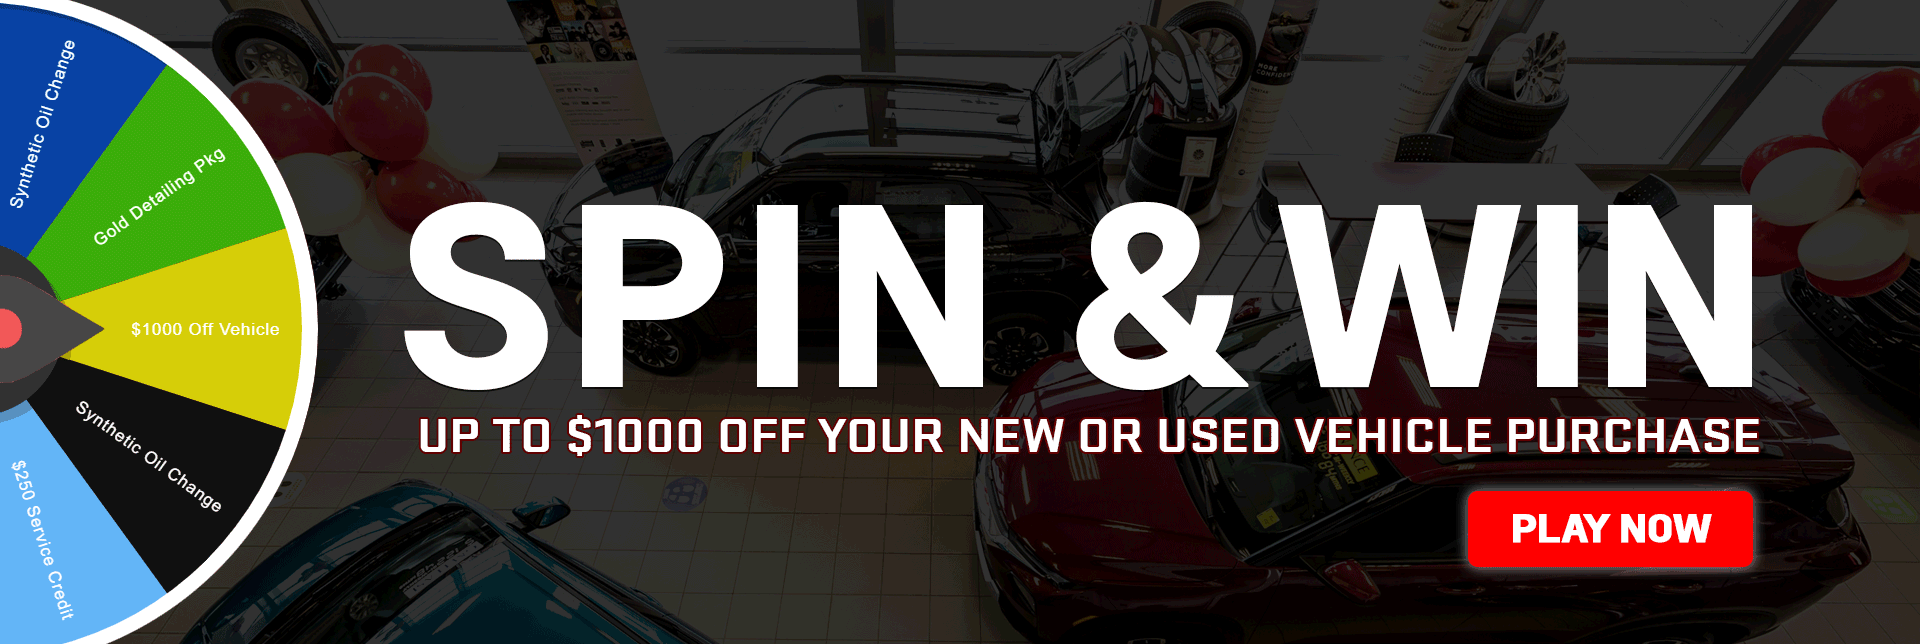 Spin & Win Up To $1000 Off Your Purchase